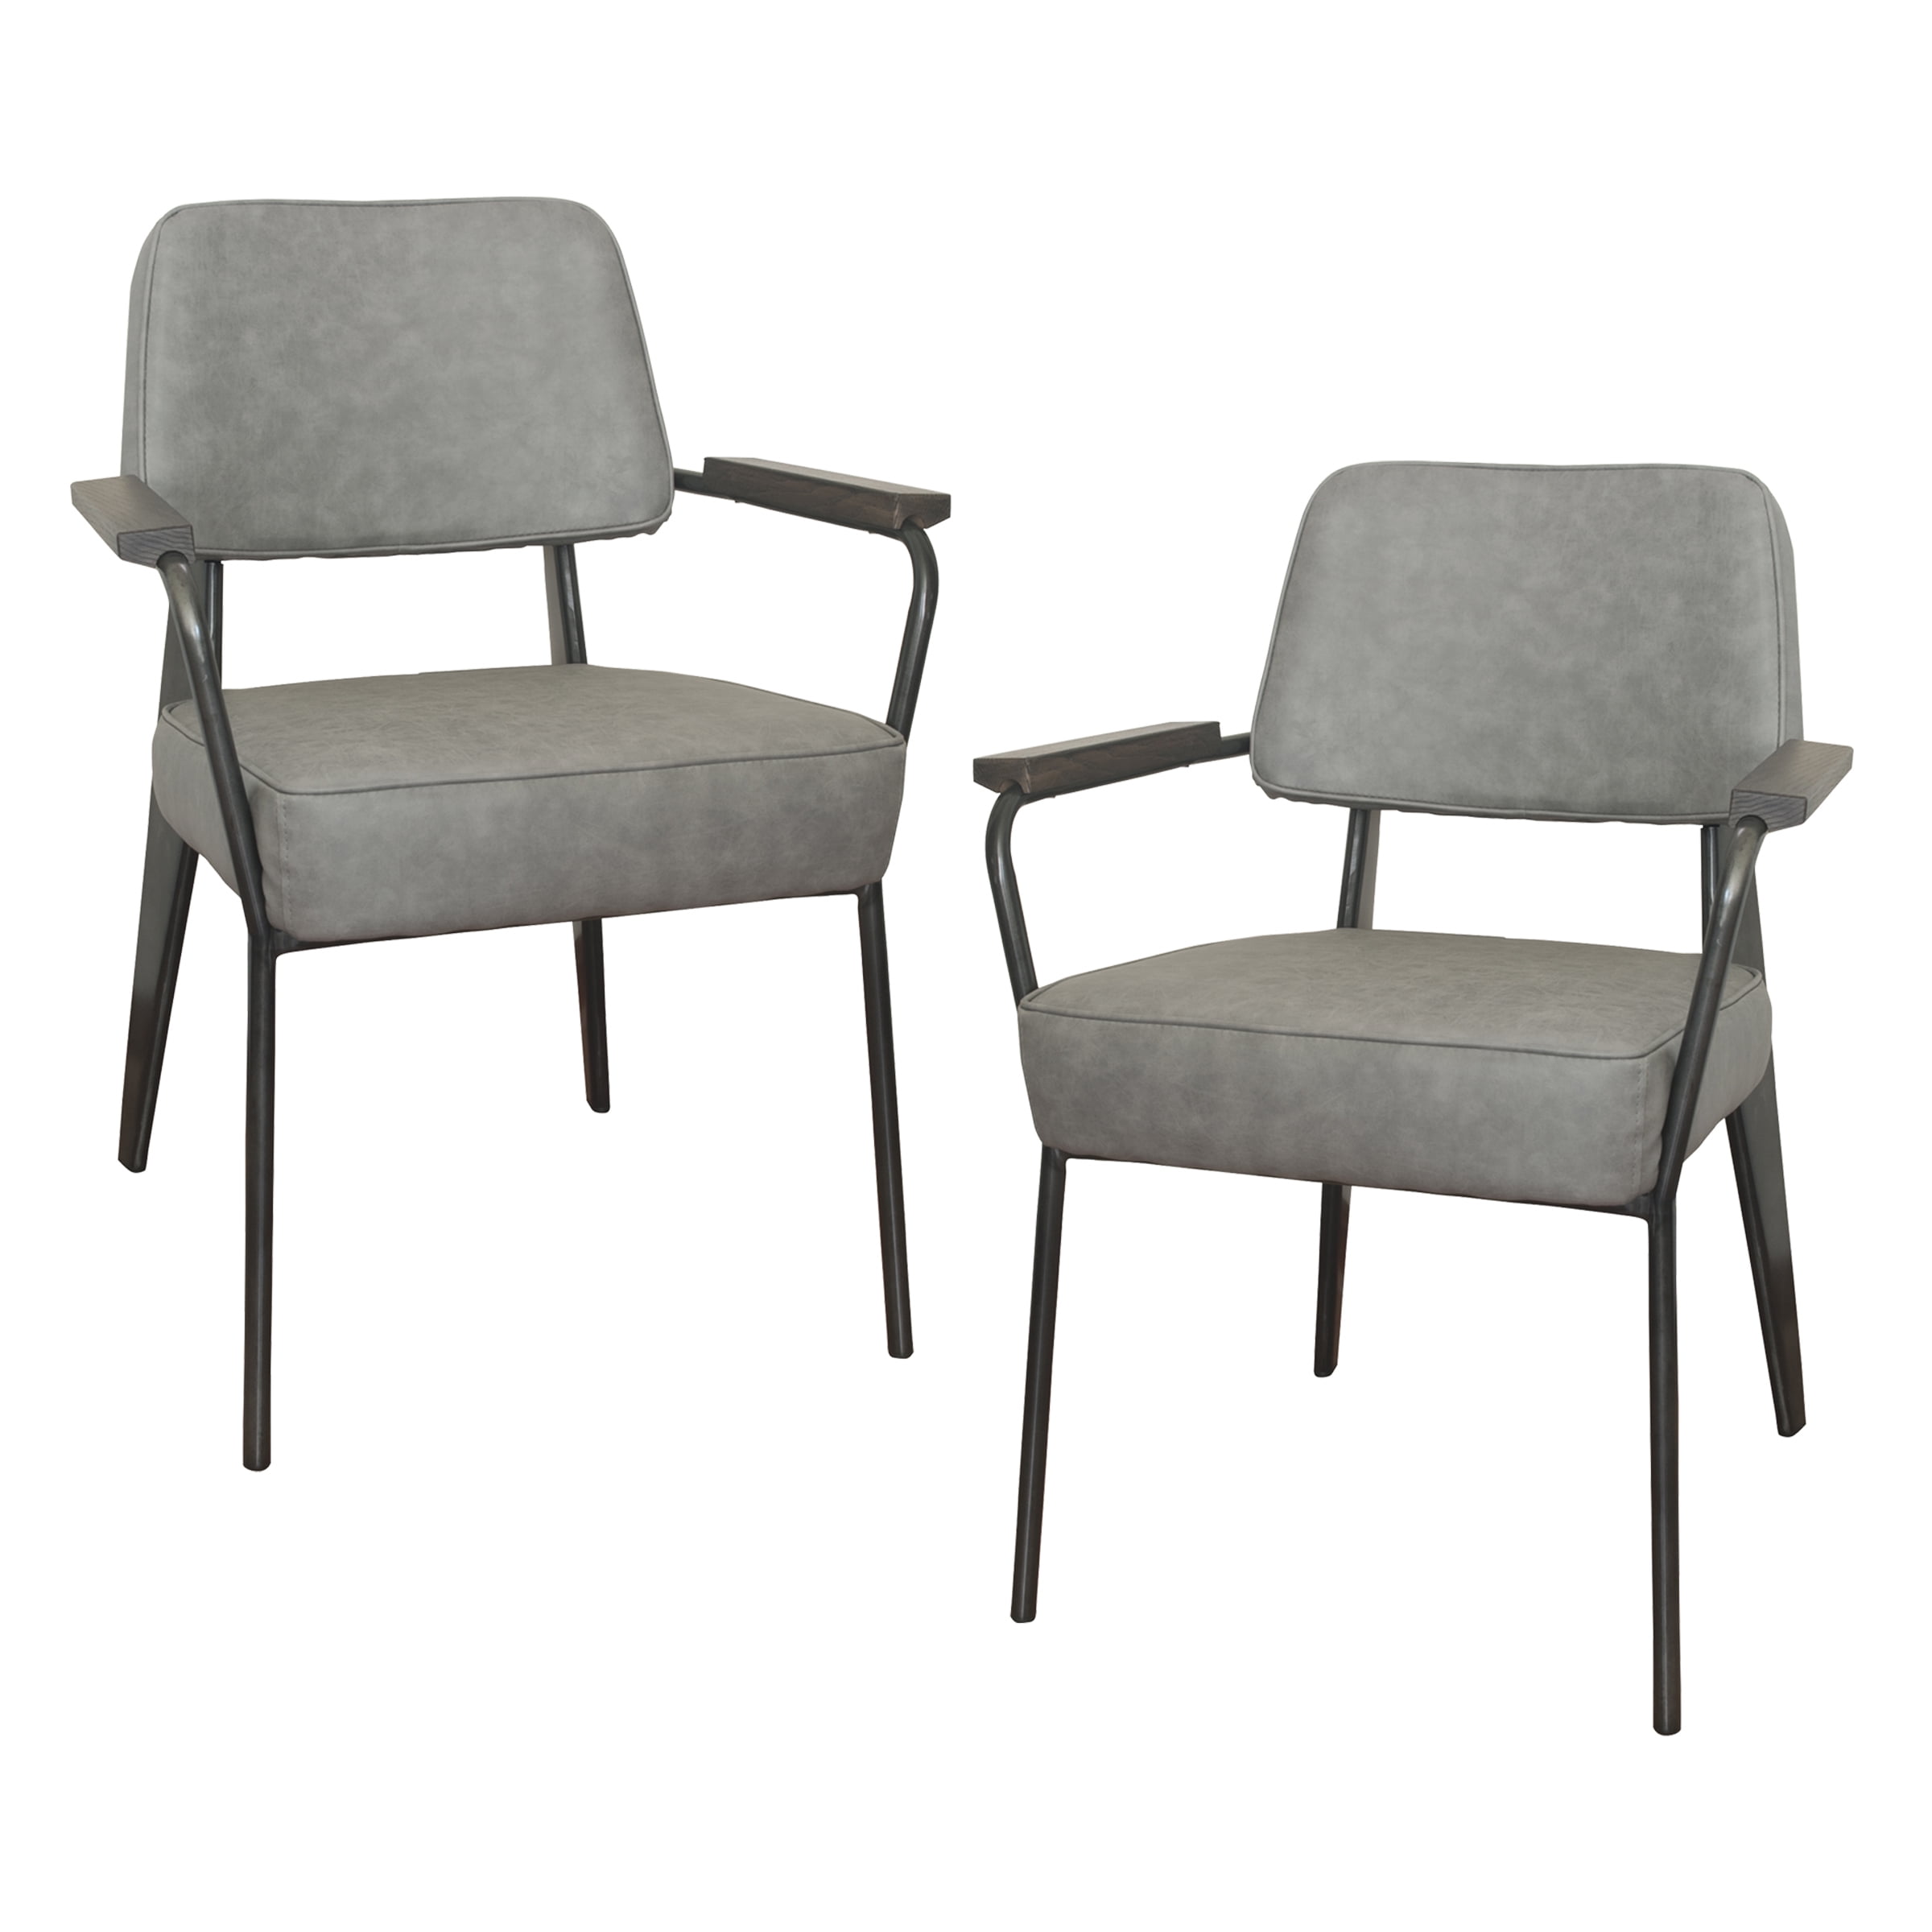 Picture of AmeriHome FDCHAIR2PCG Fauteuil Direction Accent Chair Set, Gray - 2 Piece